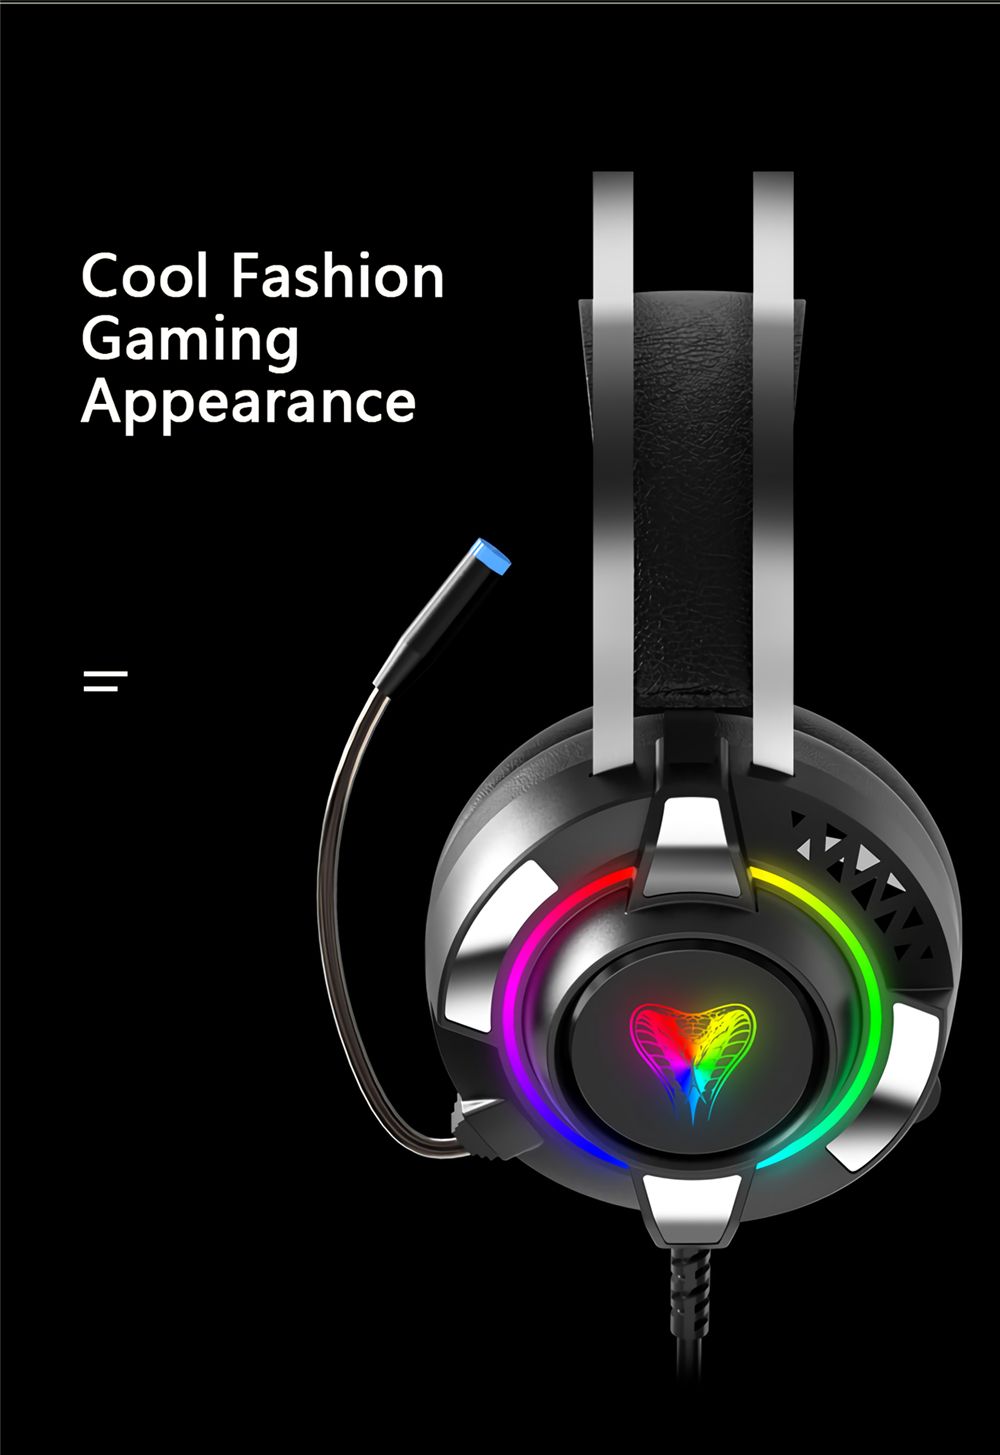 M9-71-Channel-Gaming-Headset-RGB-Wired-Game-Headphone-Adjustable-Bass-Stereo-Headset-with-Mic-for-Co-1712791